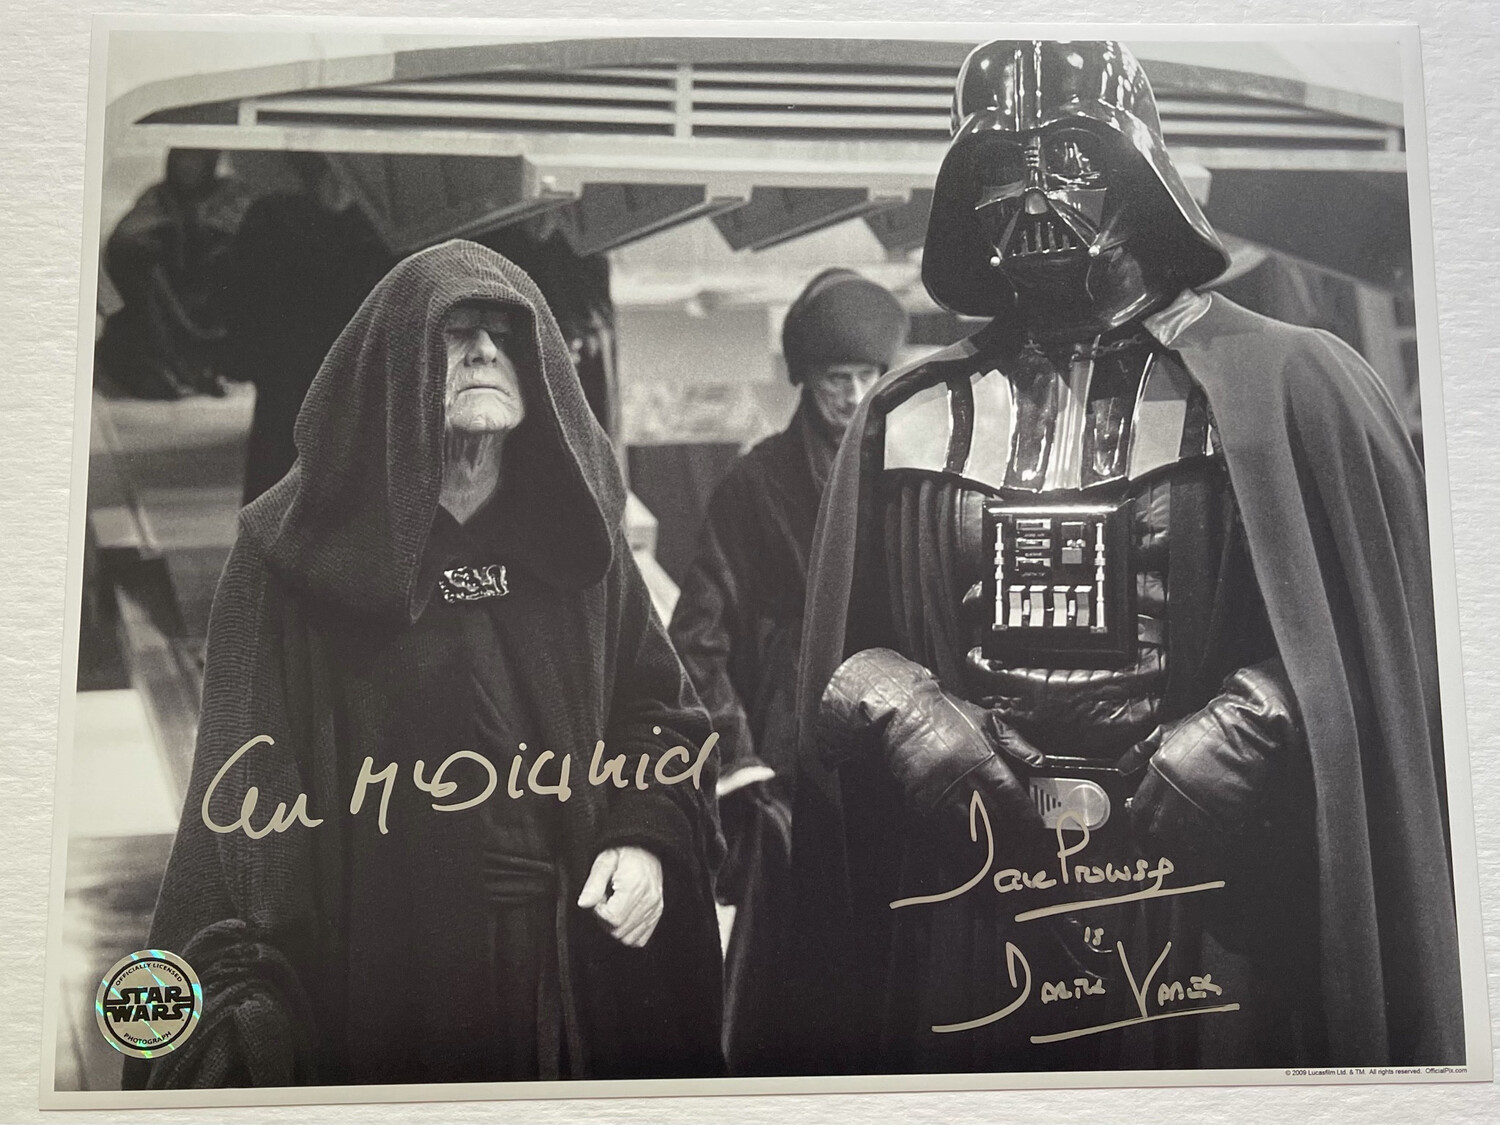 11X14 DARTH VADER PHOTO SIGNED BY DAVE PROWSE AND IAN MCDIARMID